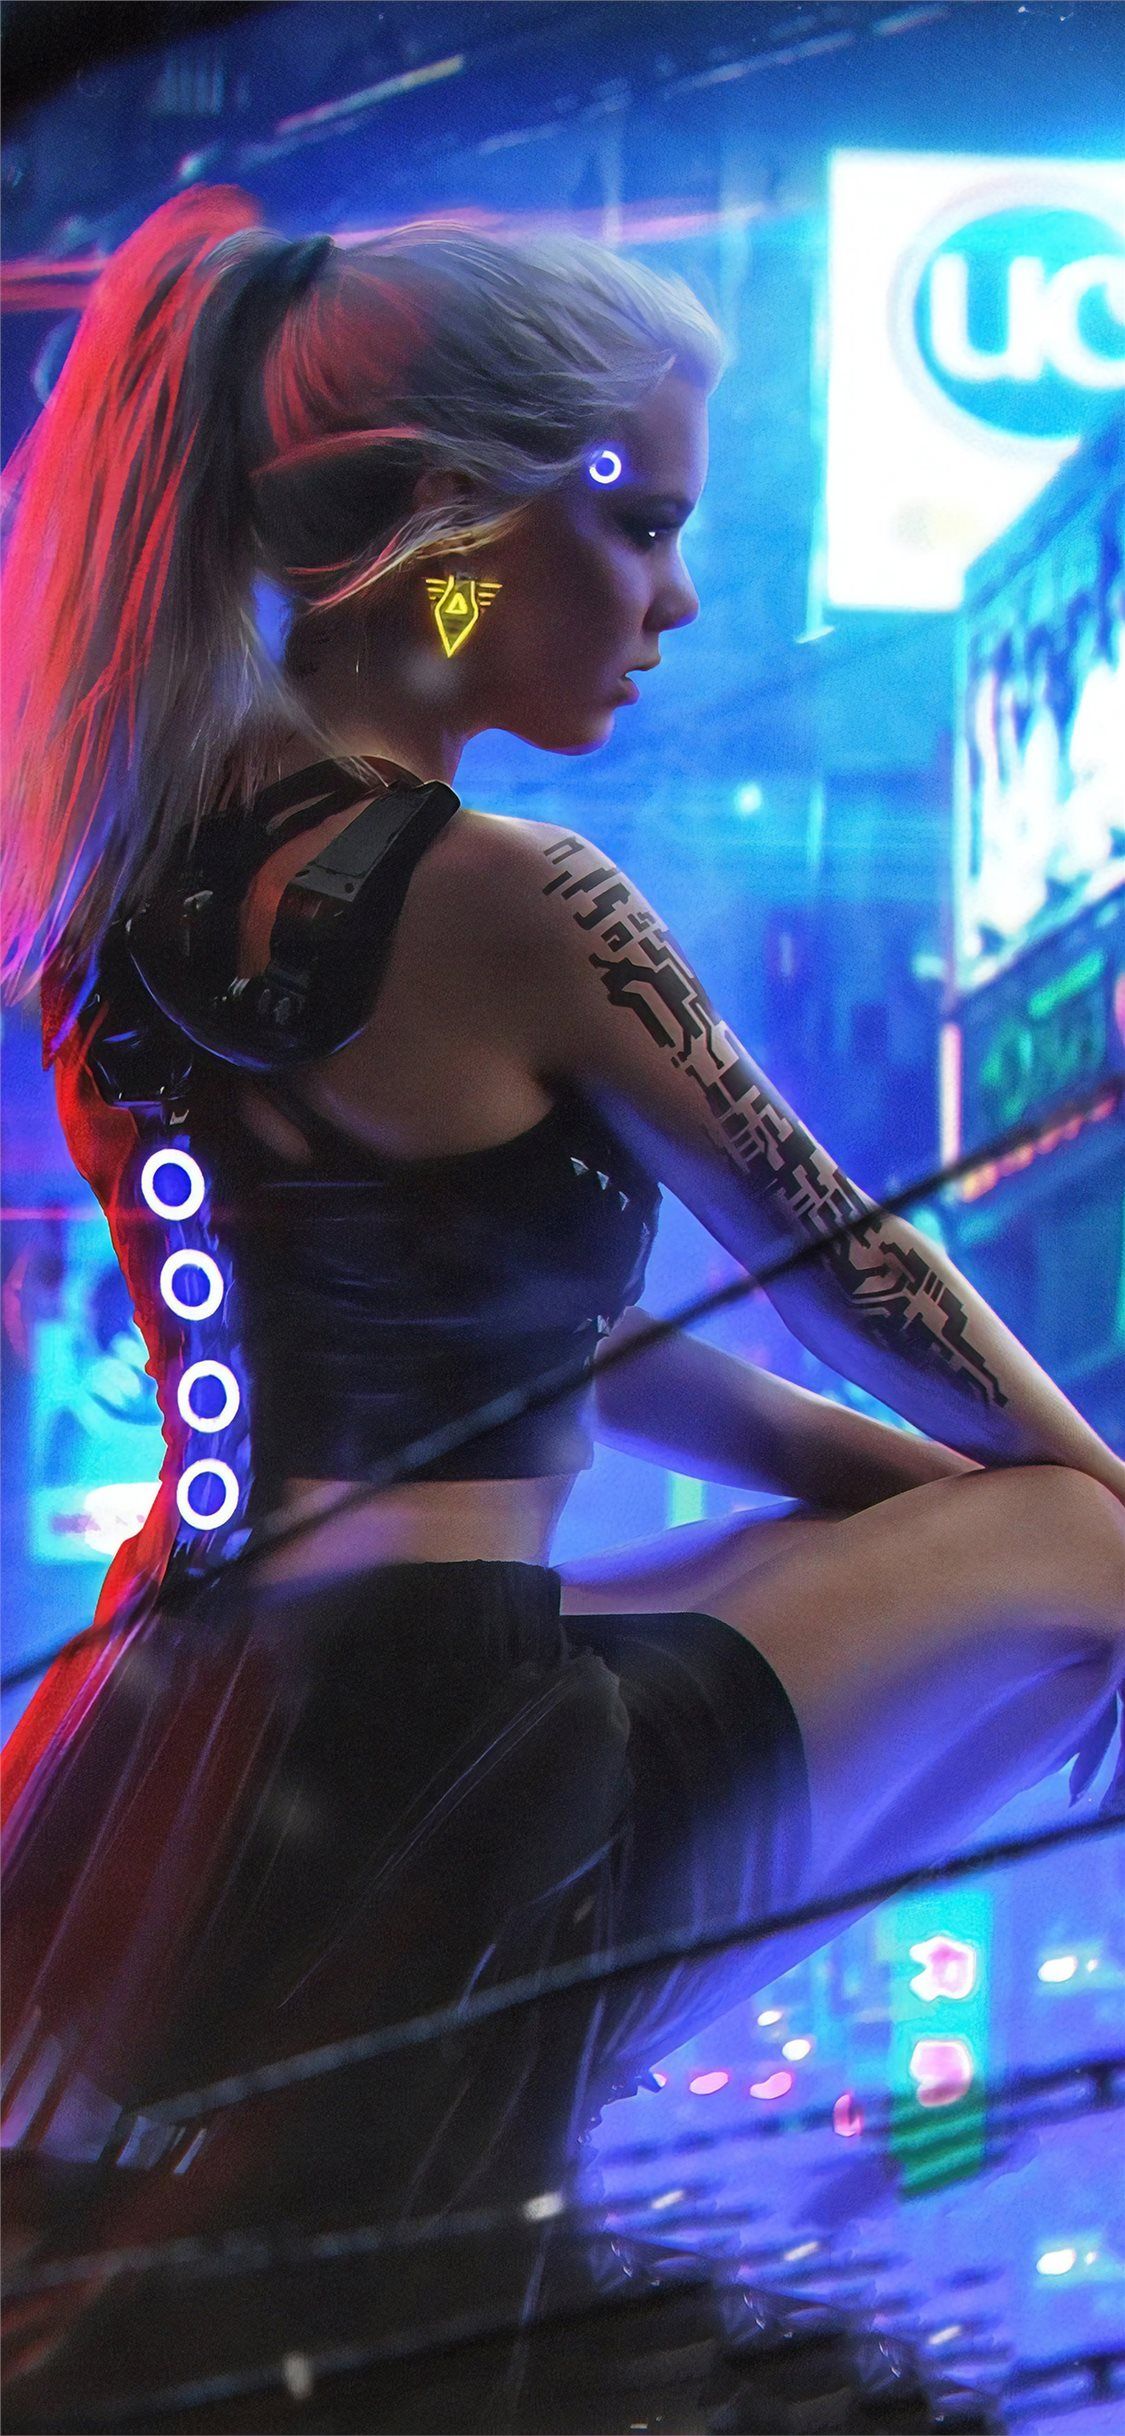 Cyberpunk girl with glowing skin and neon lights in the city - Cyberpunk